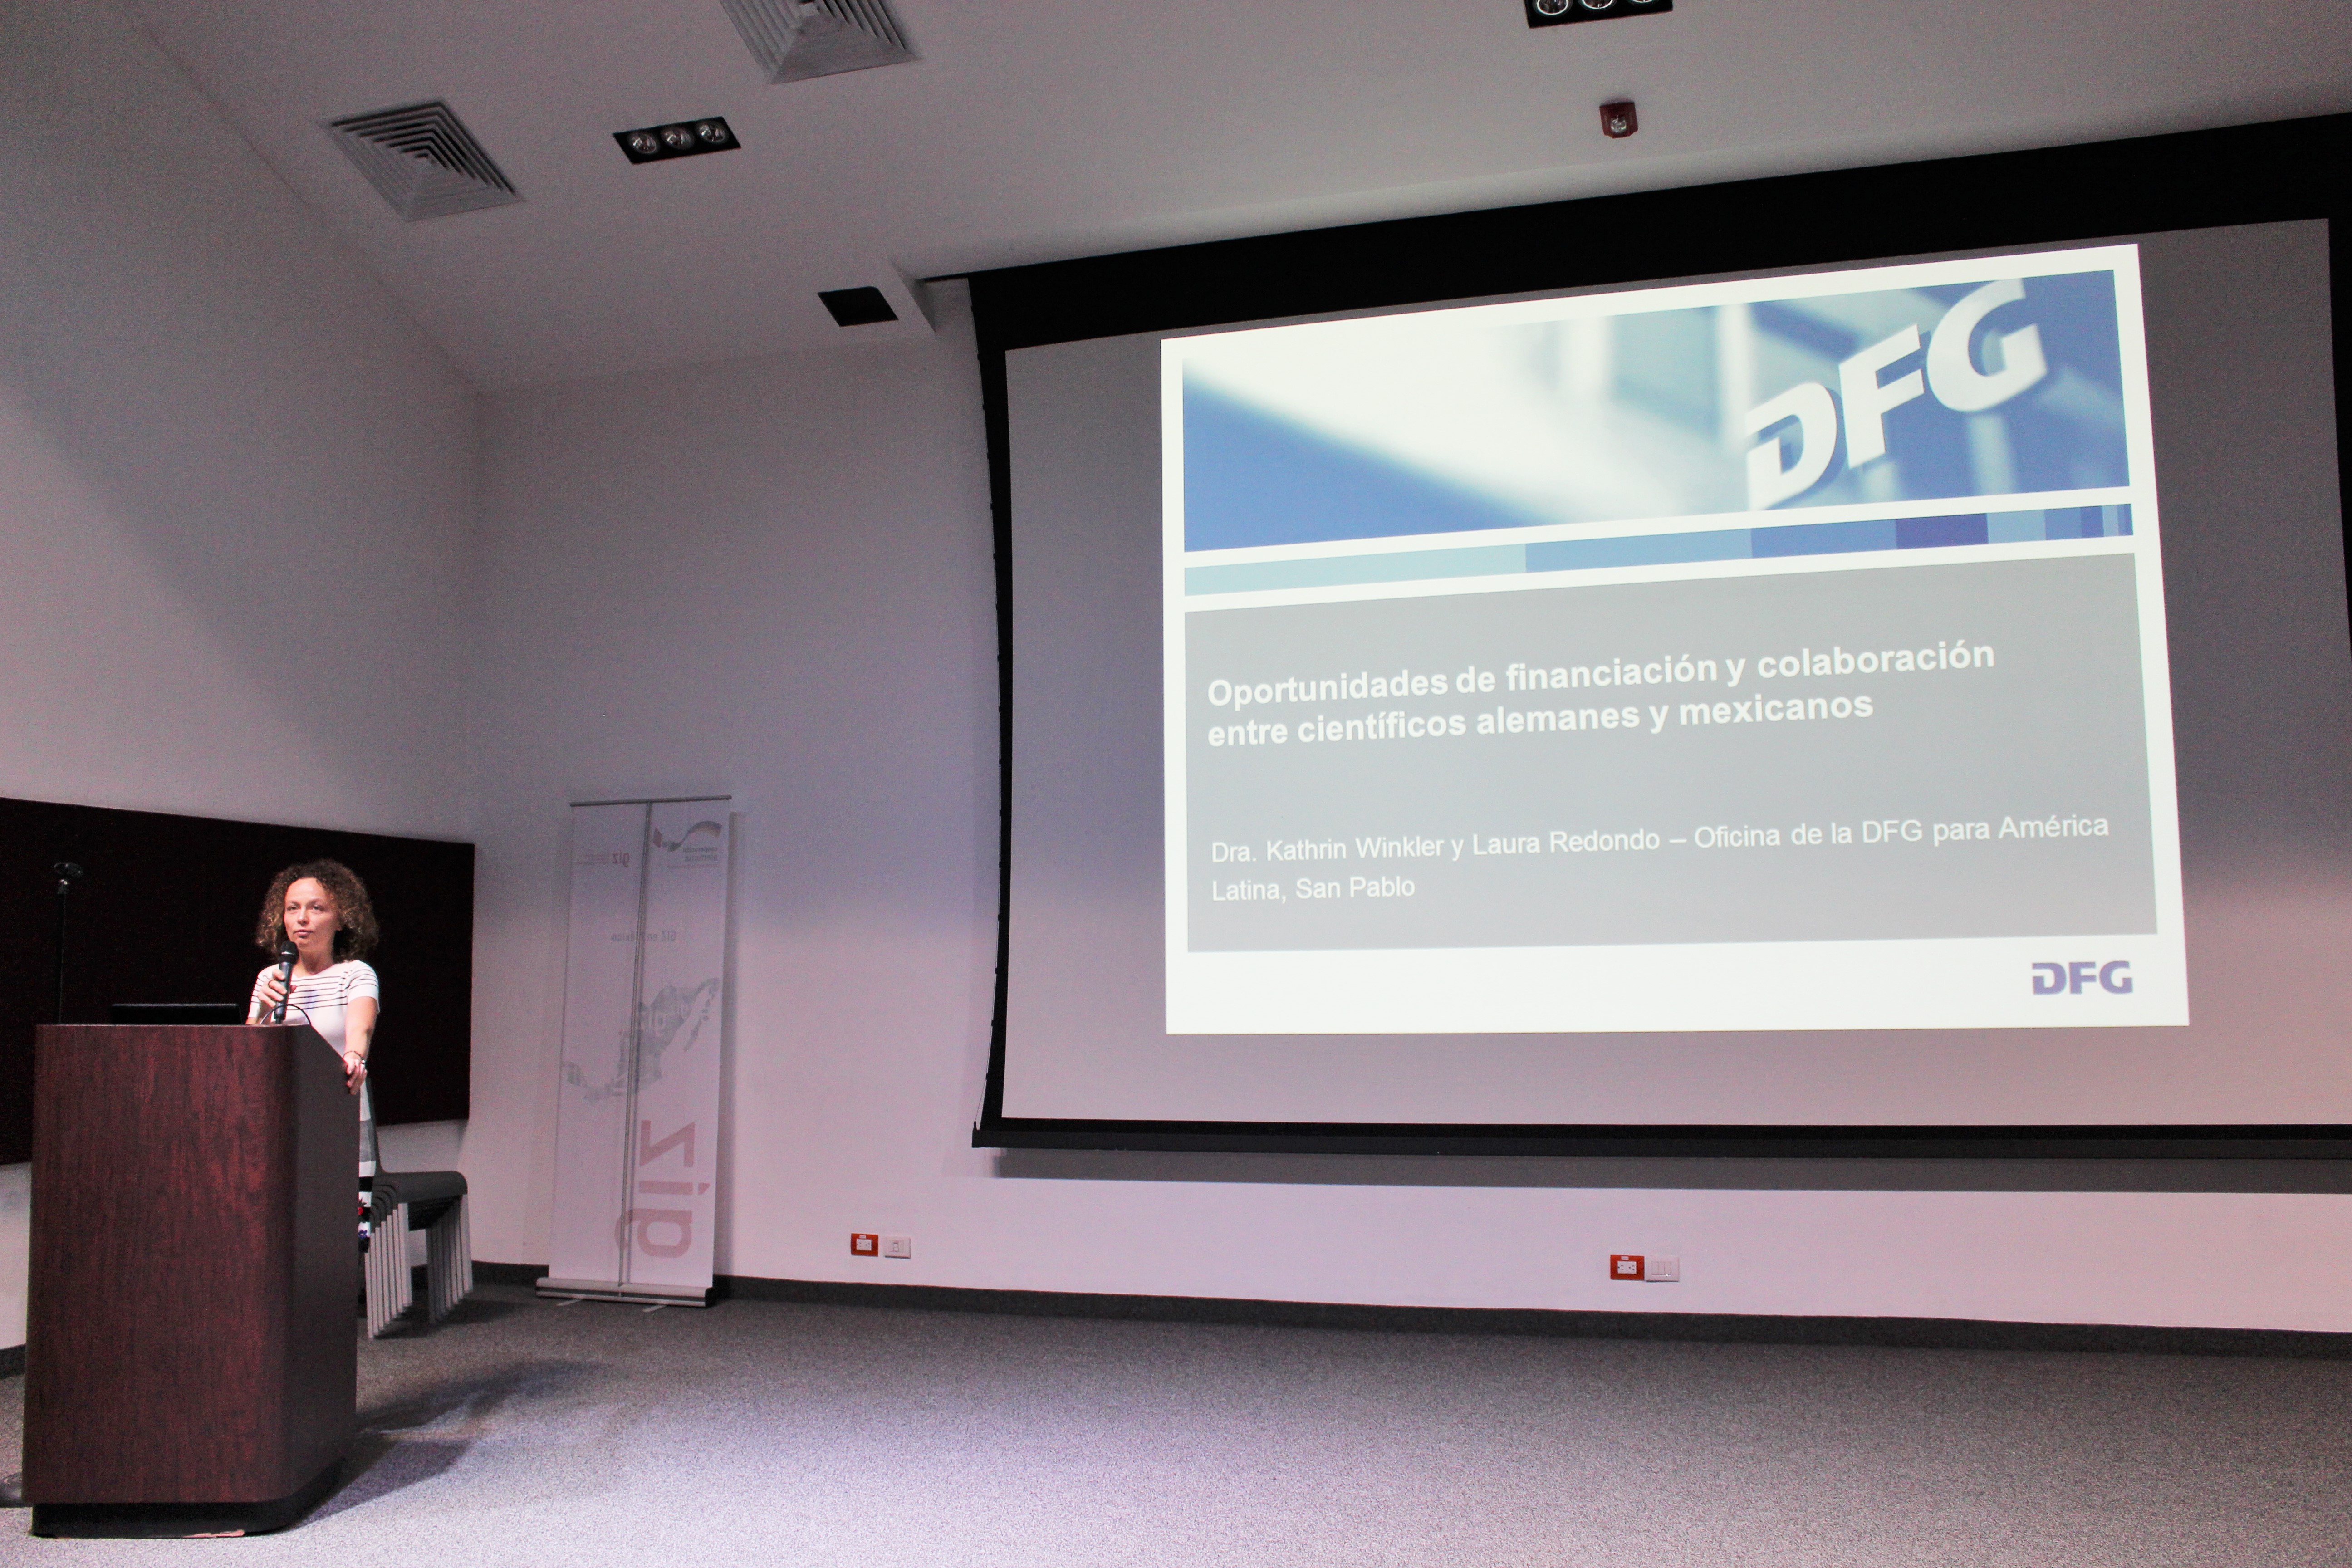 Dr. Kathrin Winkler opened the DFG presentation with a look at internationalisation strategies...